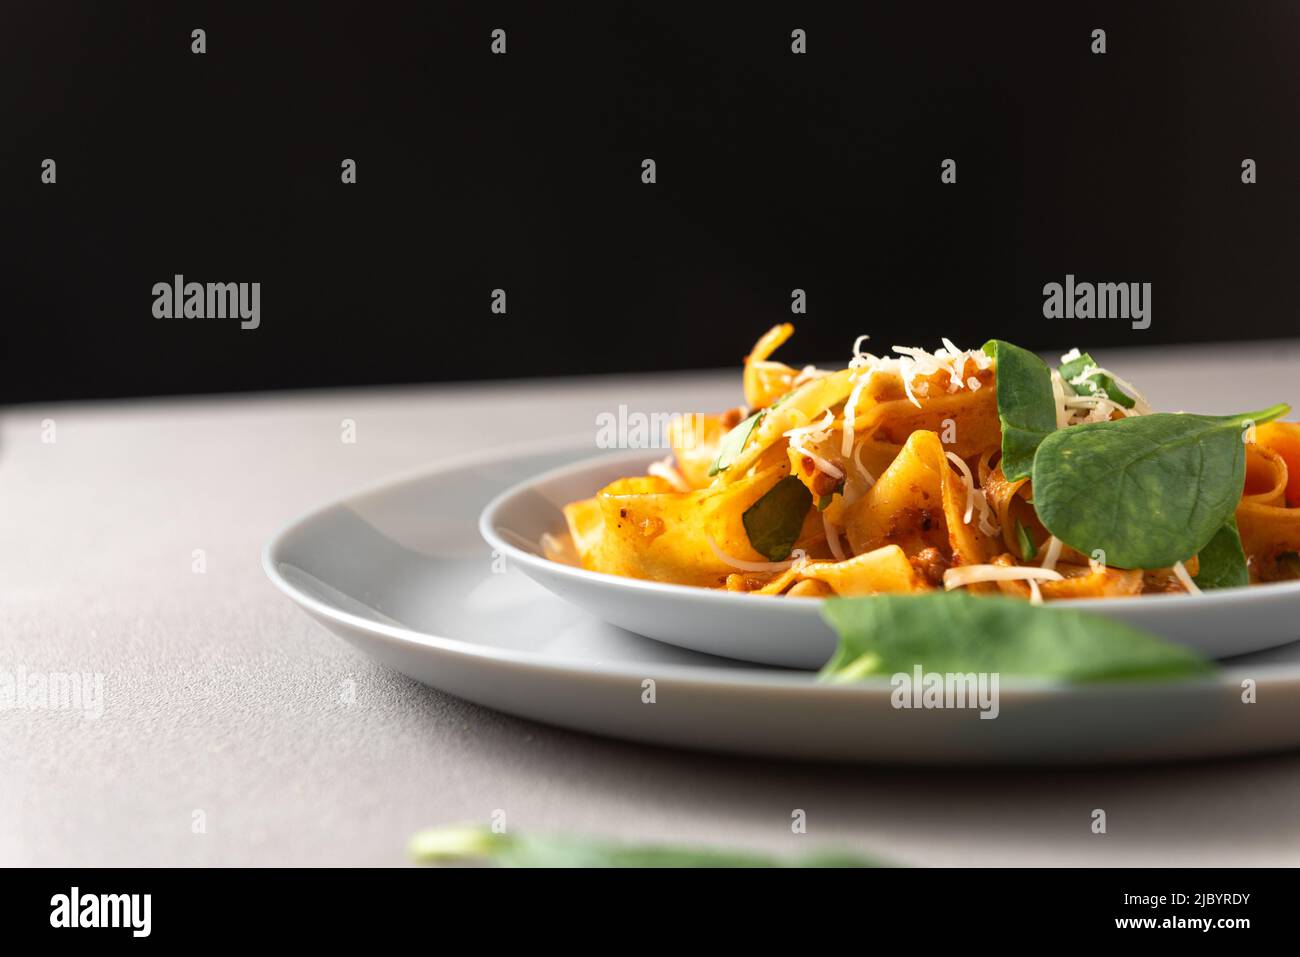 Pasta pappardelle with beef ragout sauce in grey bowl. Grey background Stock Photo